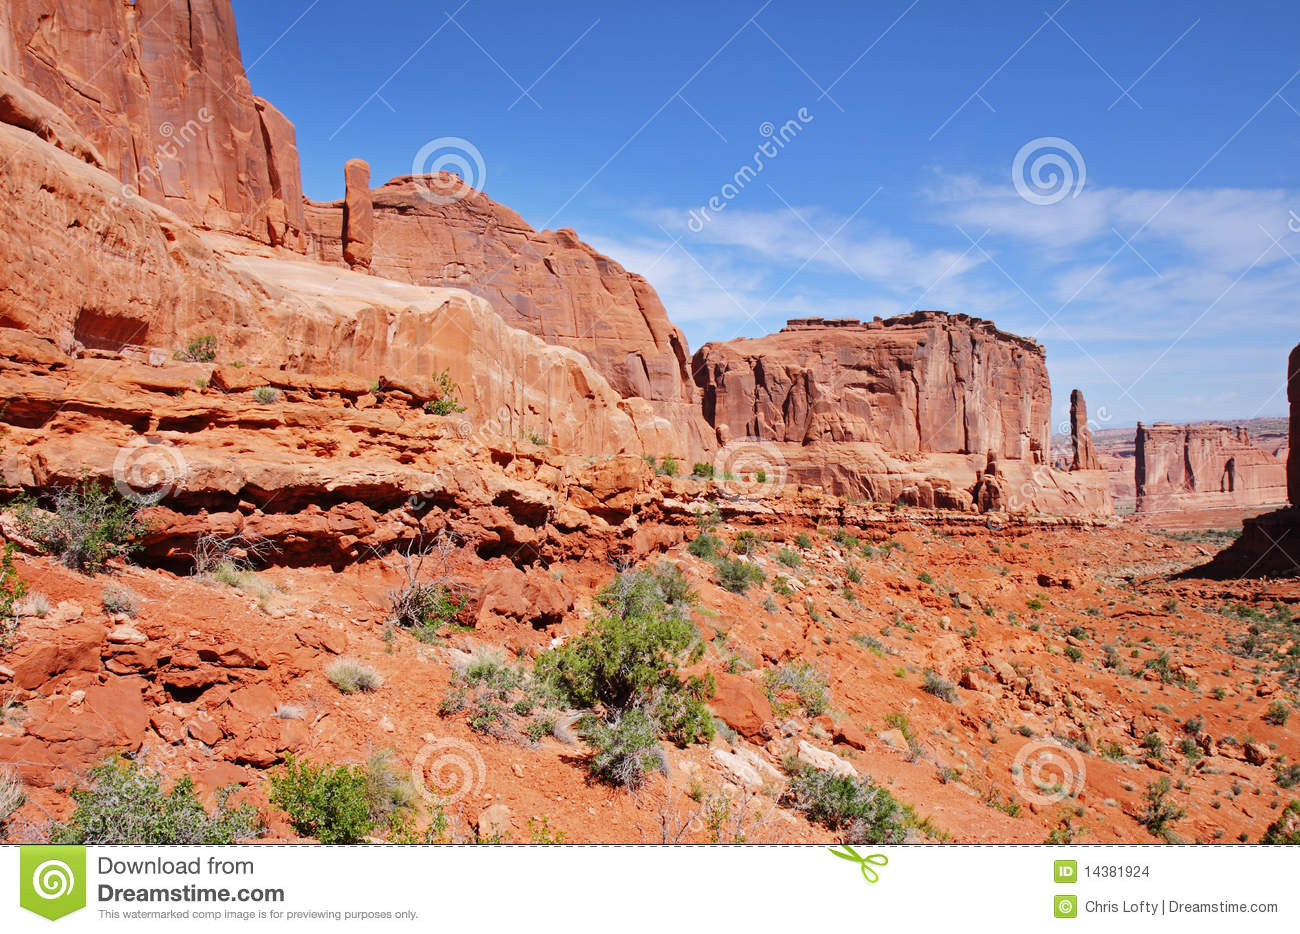 Canyon Landscape In The Usa Stock Images   Image  14381924